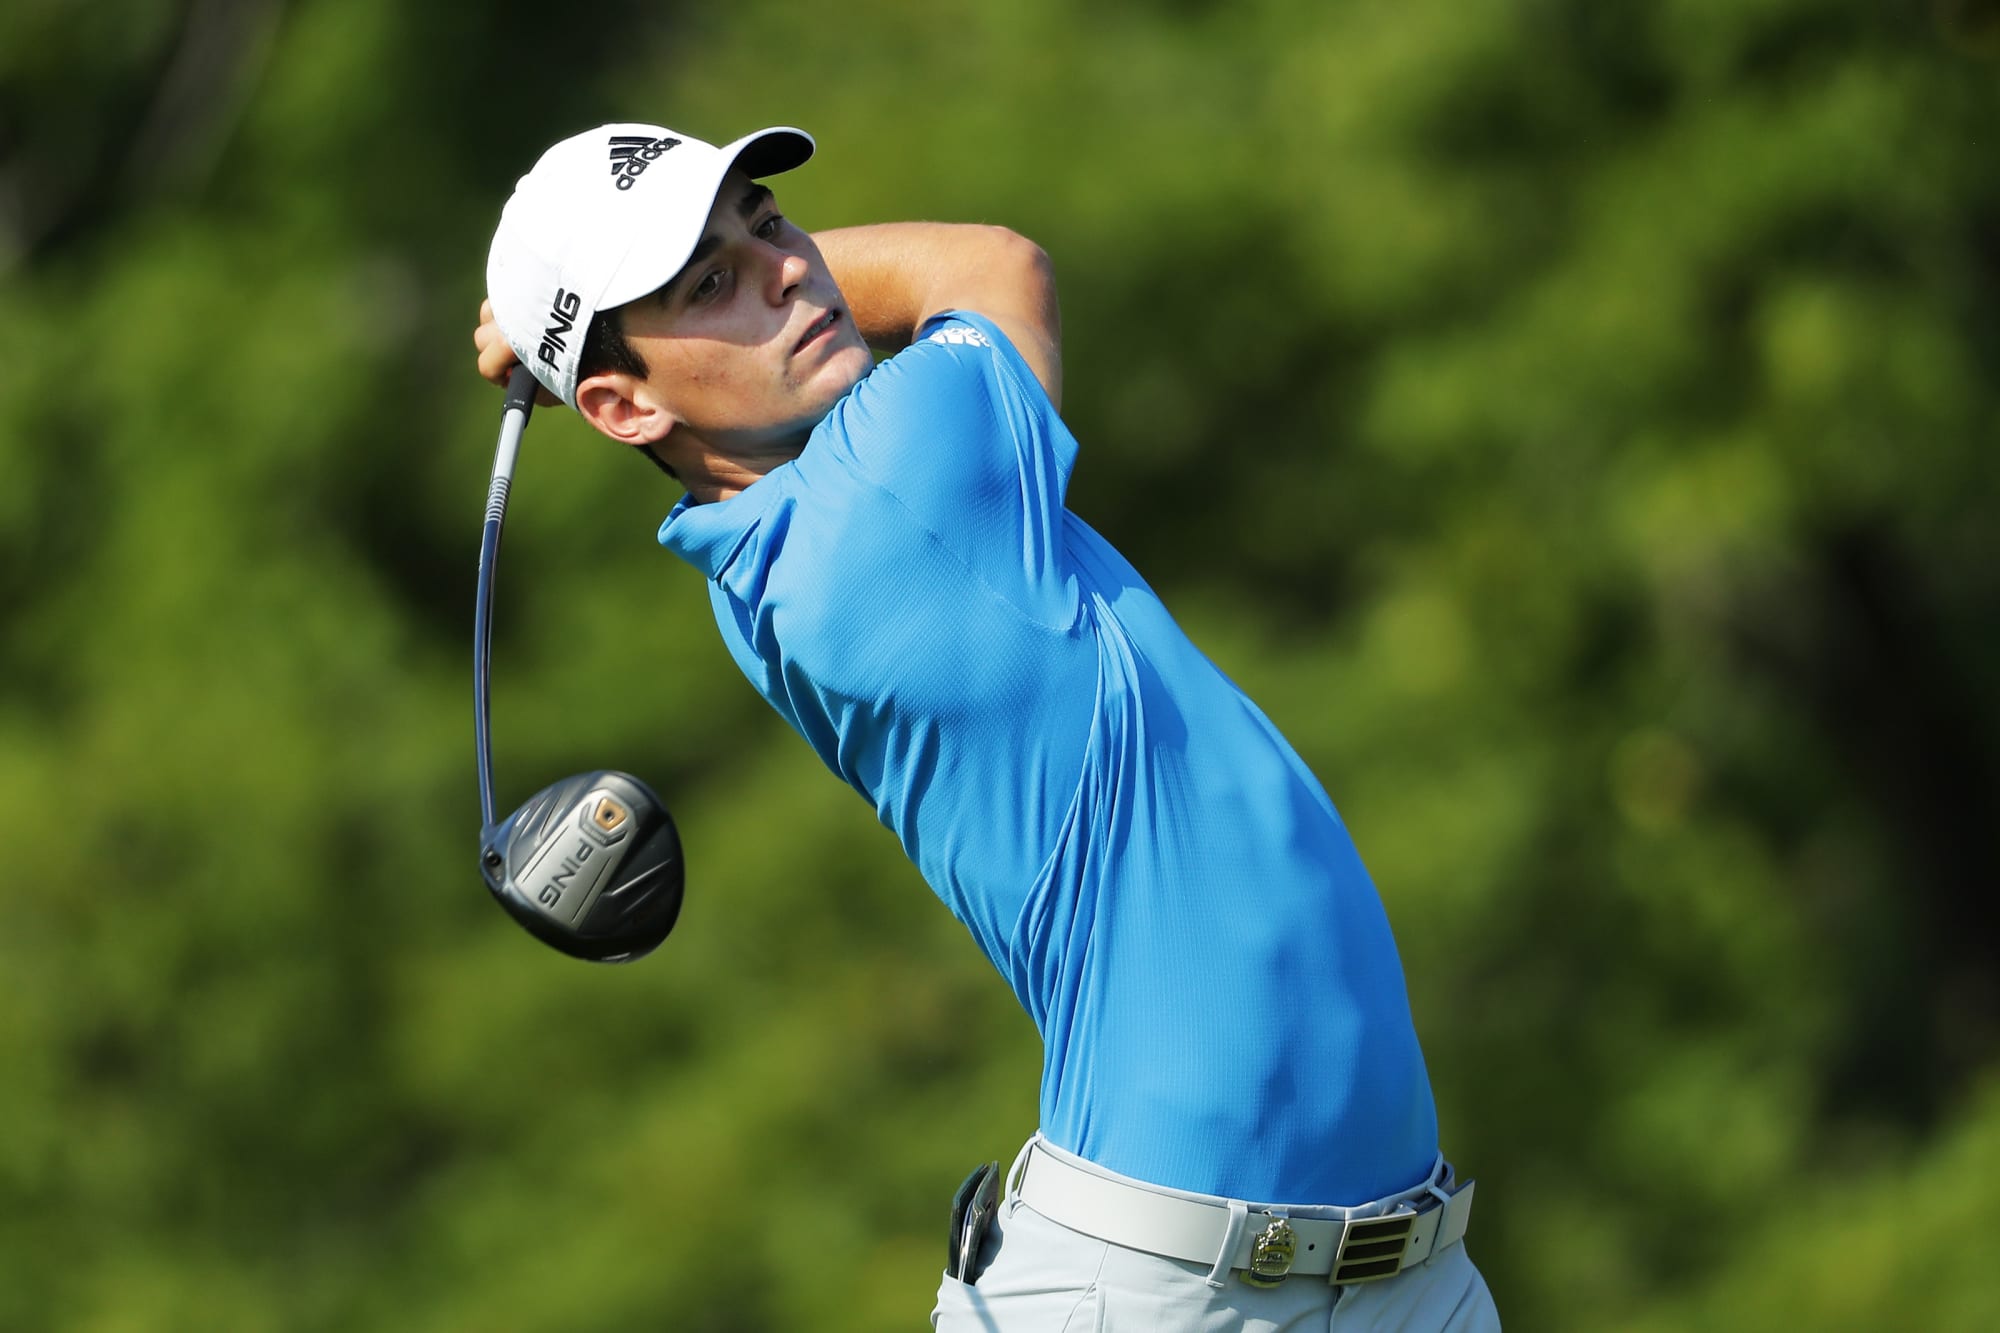 Joaquin Niemann Meet one of the PGA TOUR's youngest rising stars